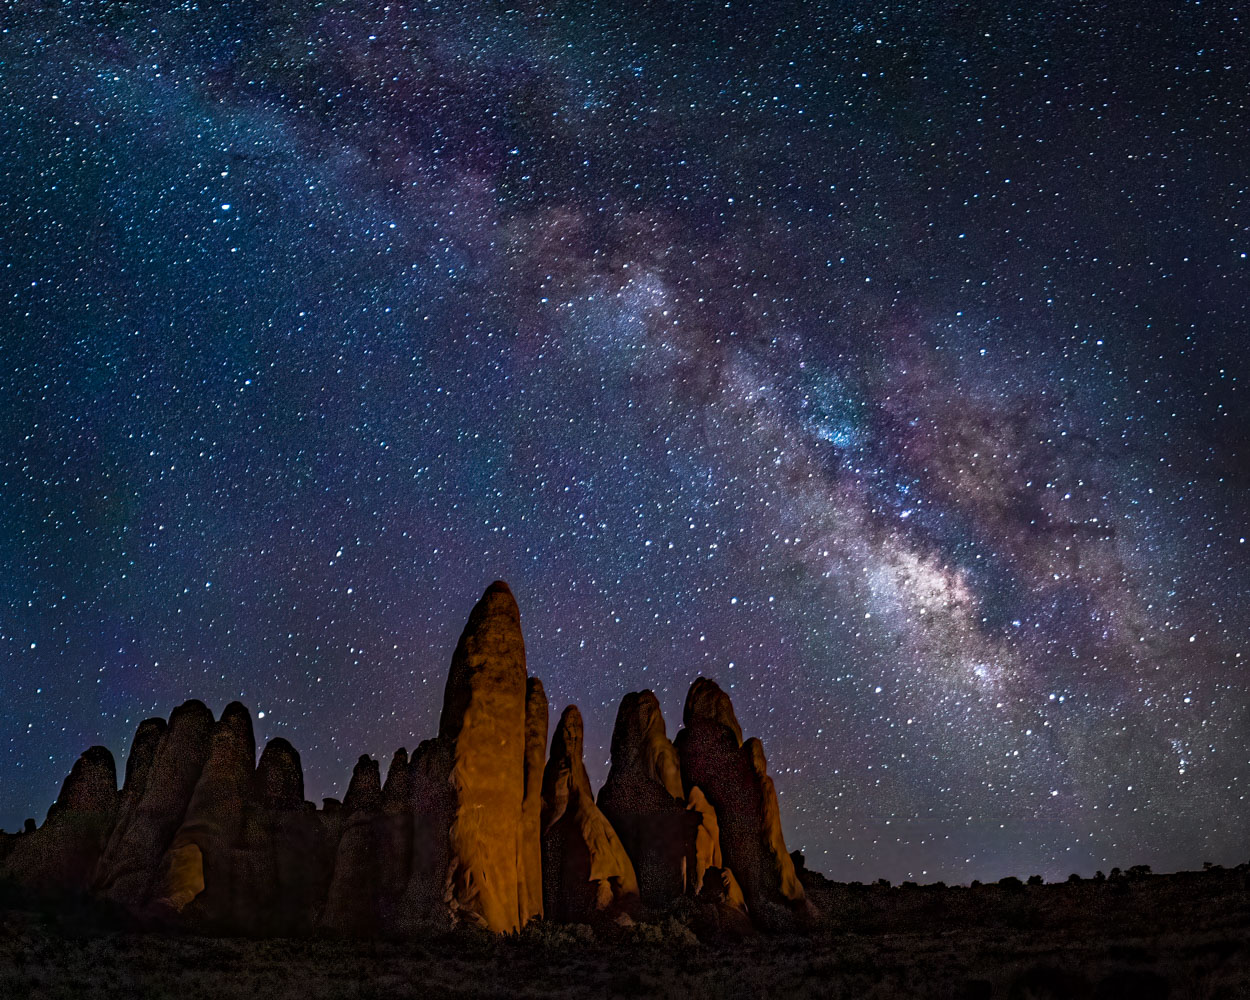 1st PrizeOpen Color In Class 3 By Scott Becque For Arches Fins Milky Way OCT-2021.jpg